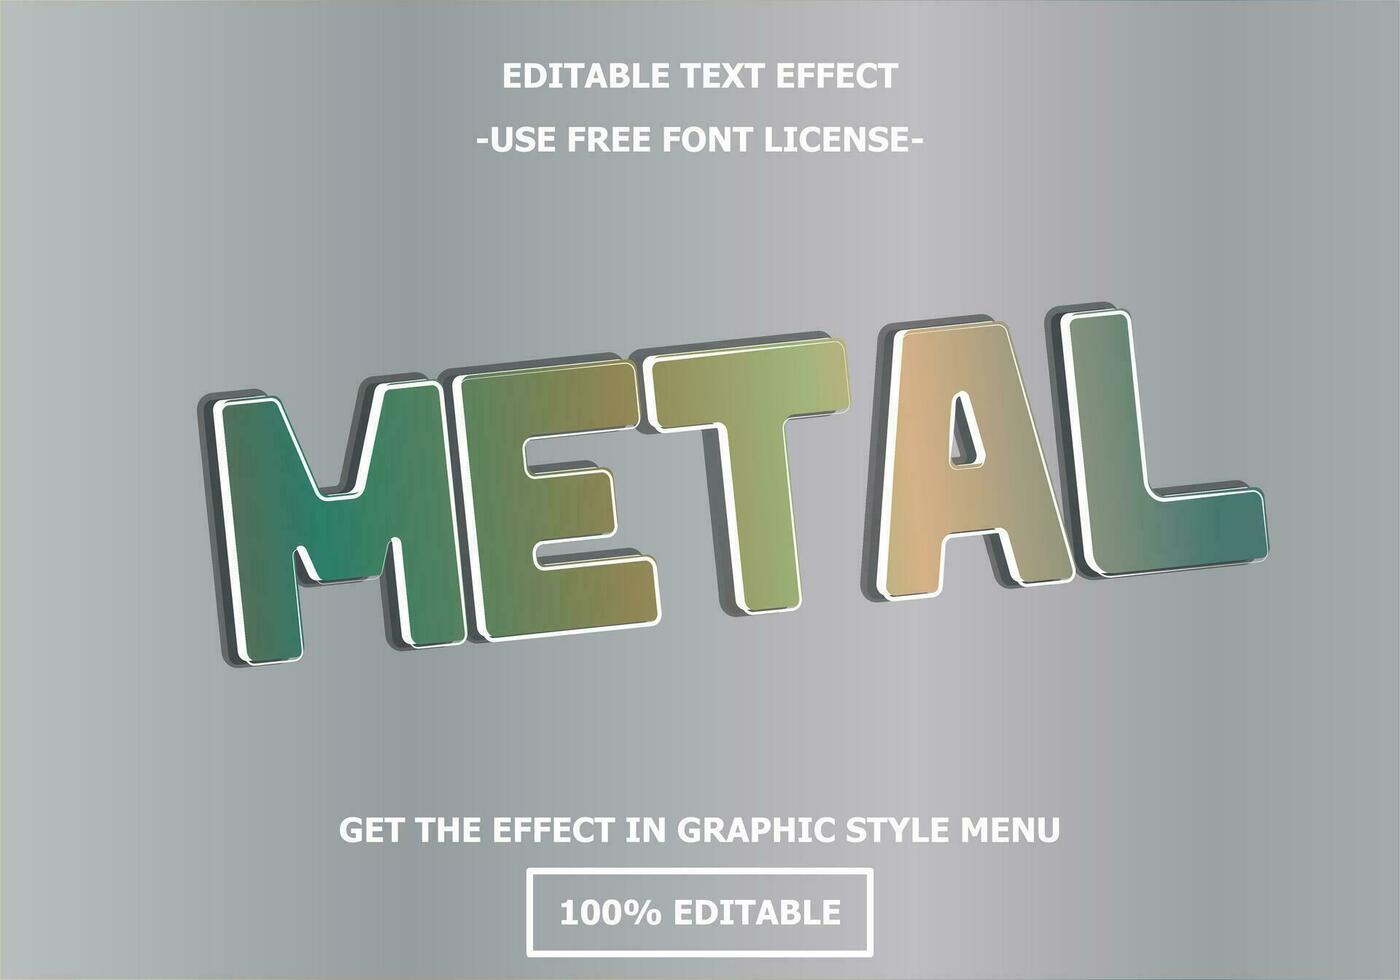 Metal 3D editable text effect template. Style premium free font license vector